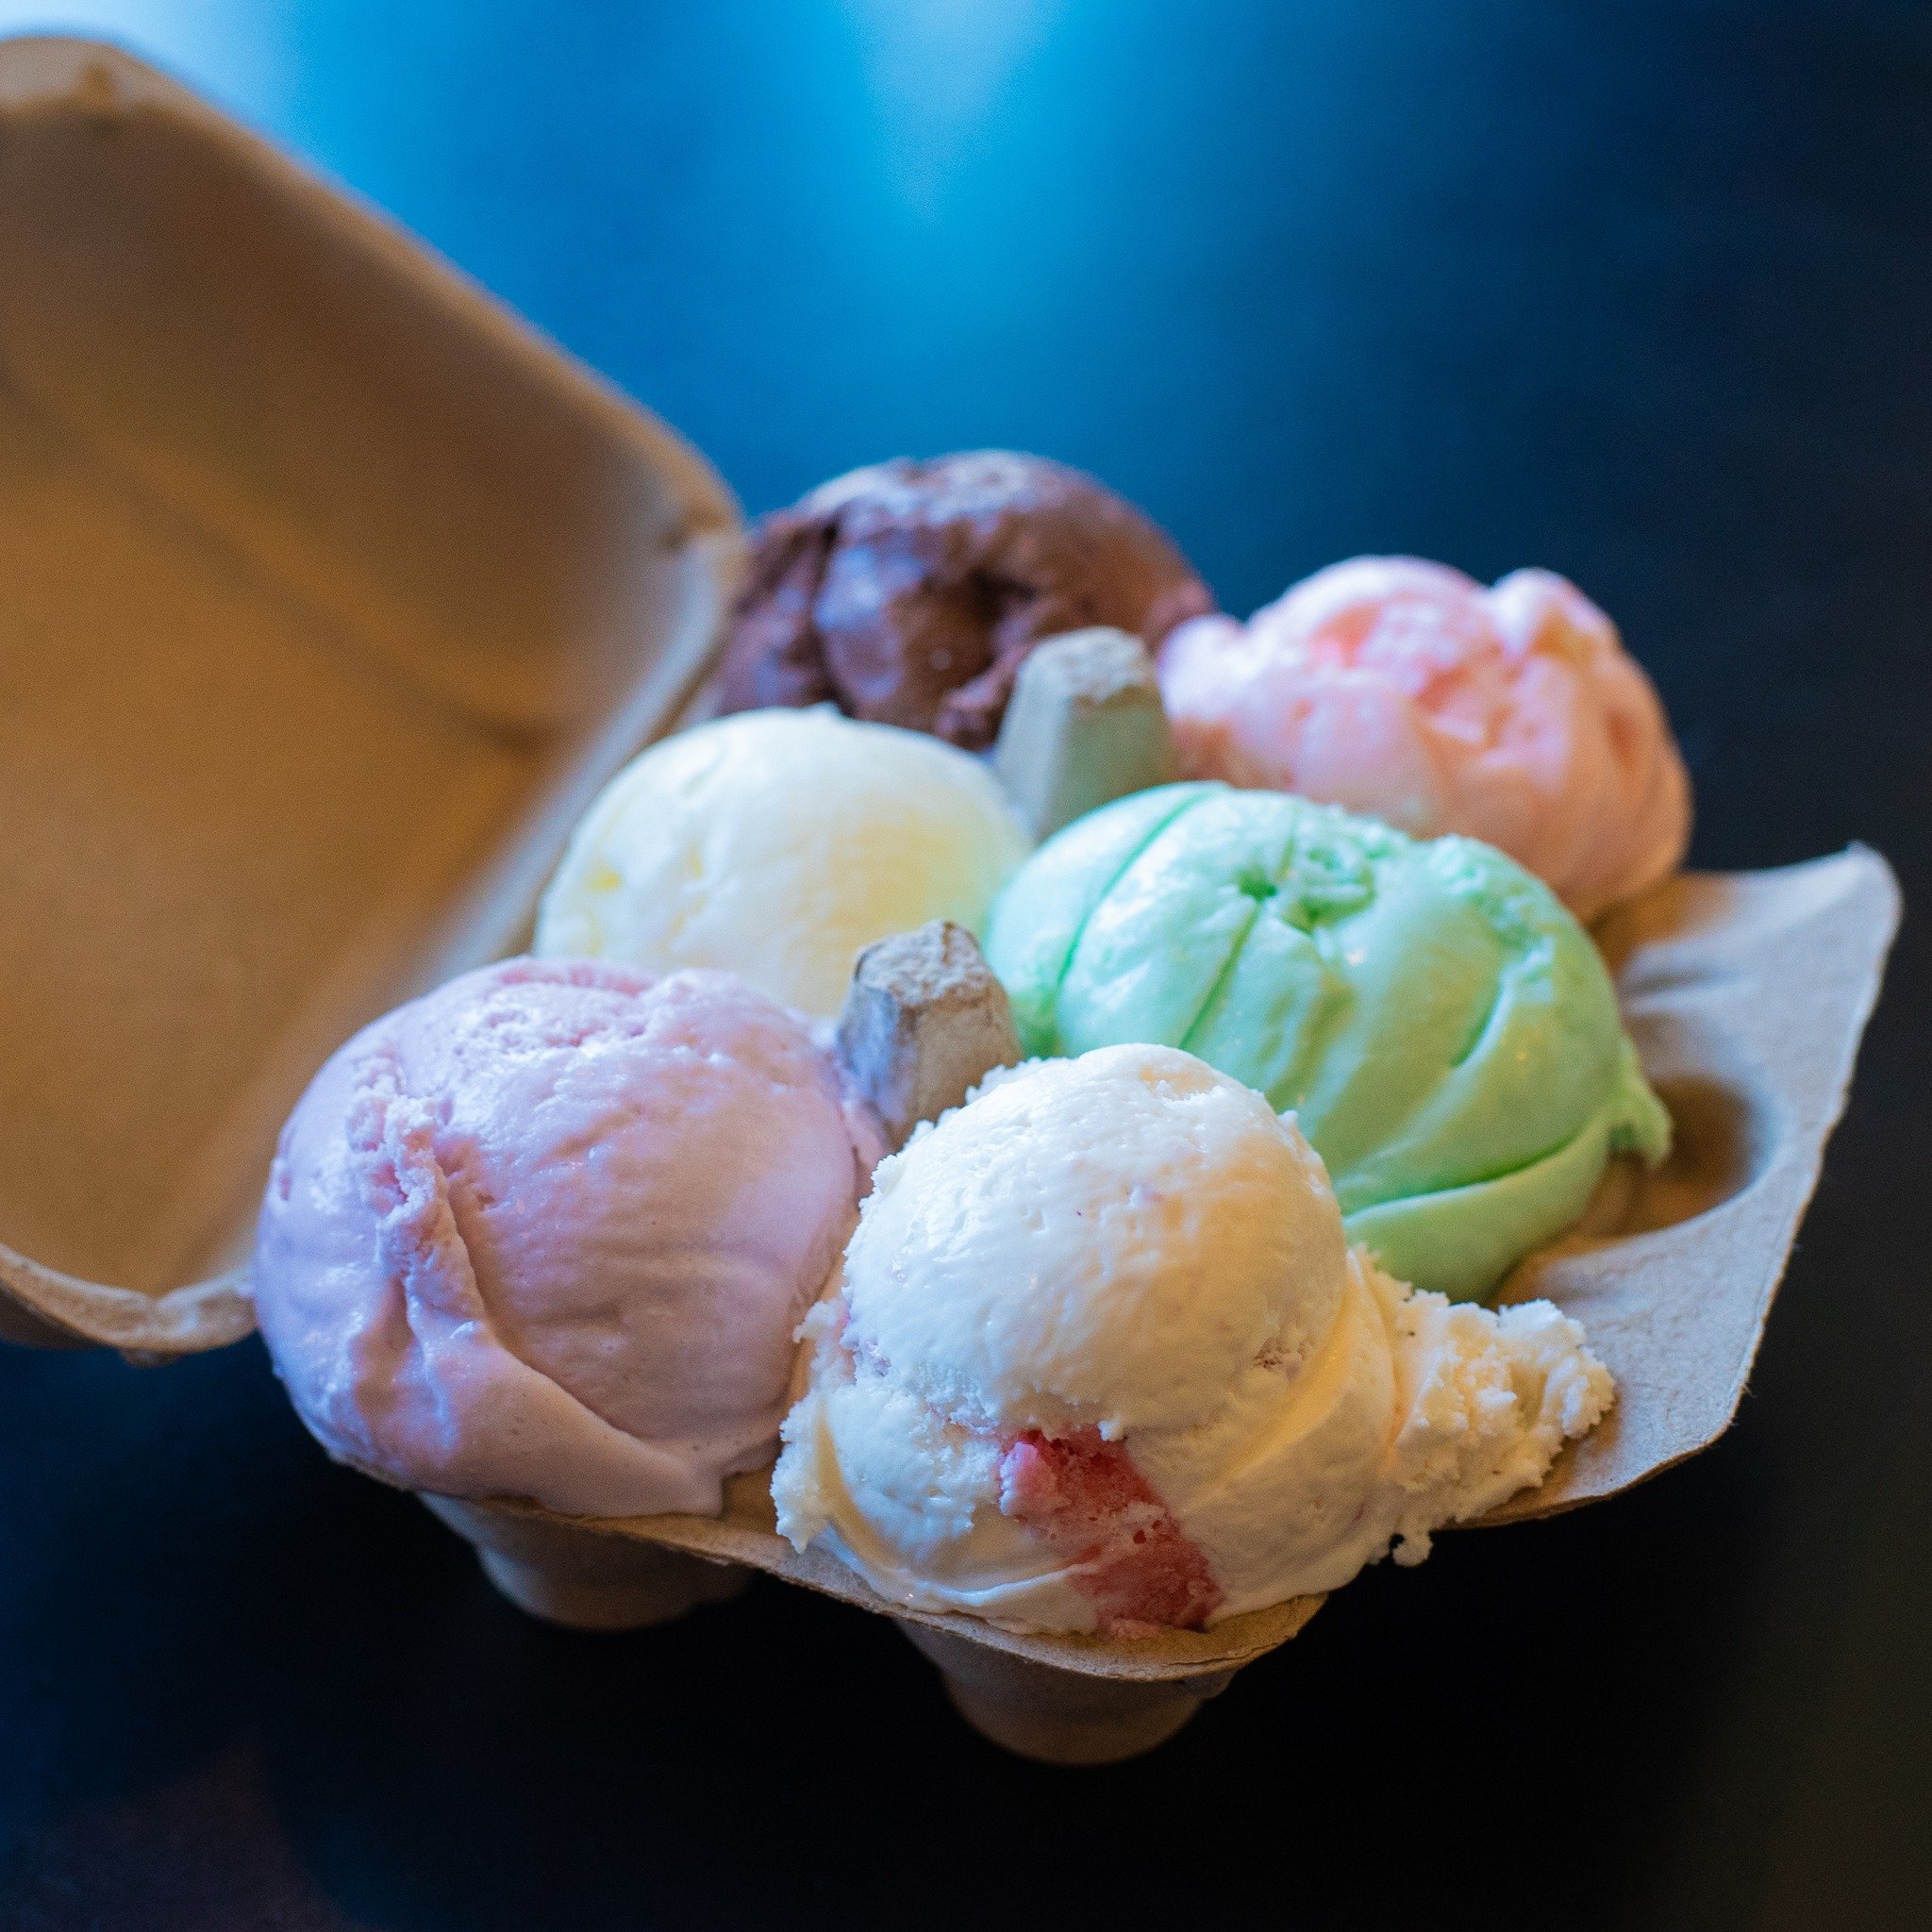 Picking just ONE of our many delicious flavors is hard. Don't.

Order one of our ice cream flights and get SIX mini scoops of any of our flavors. It's perfect for sharing, so bring a friend... or don't. We won't tell.🤫